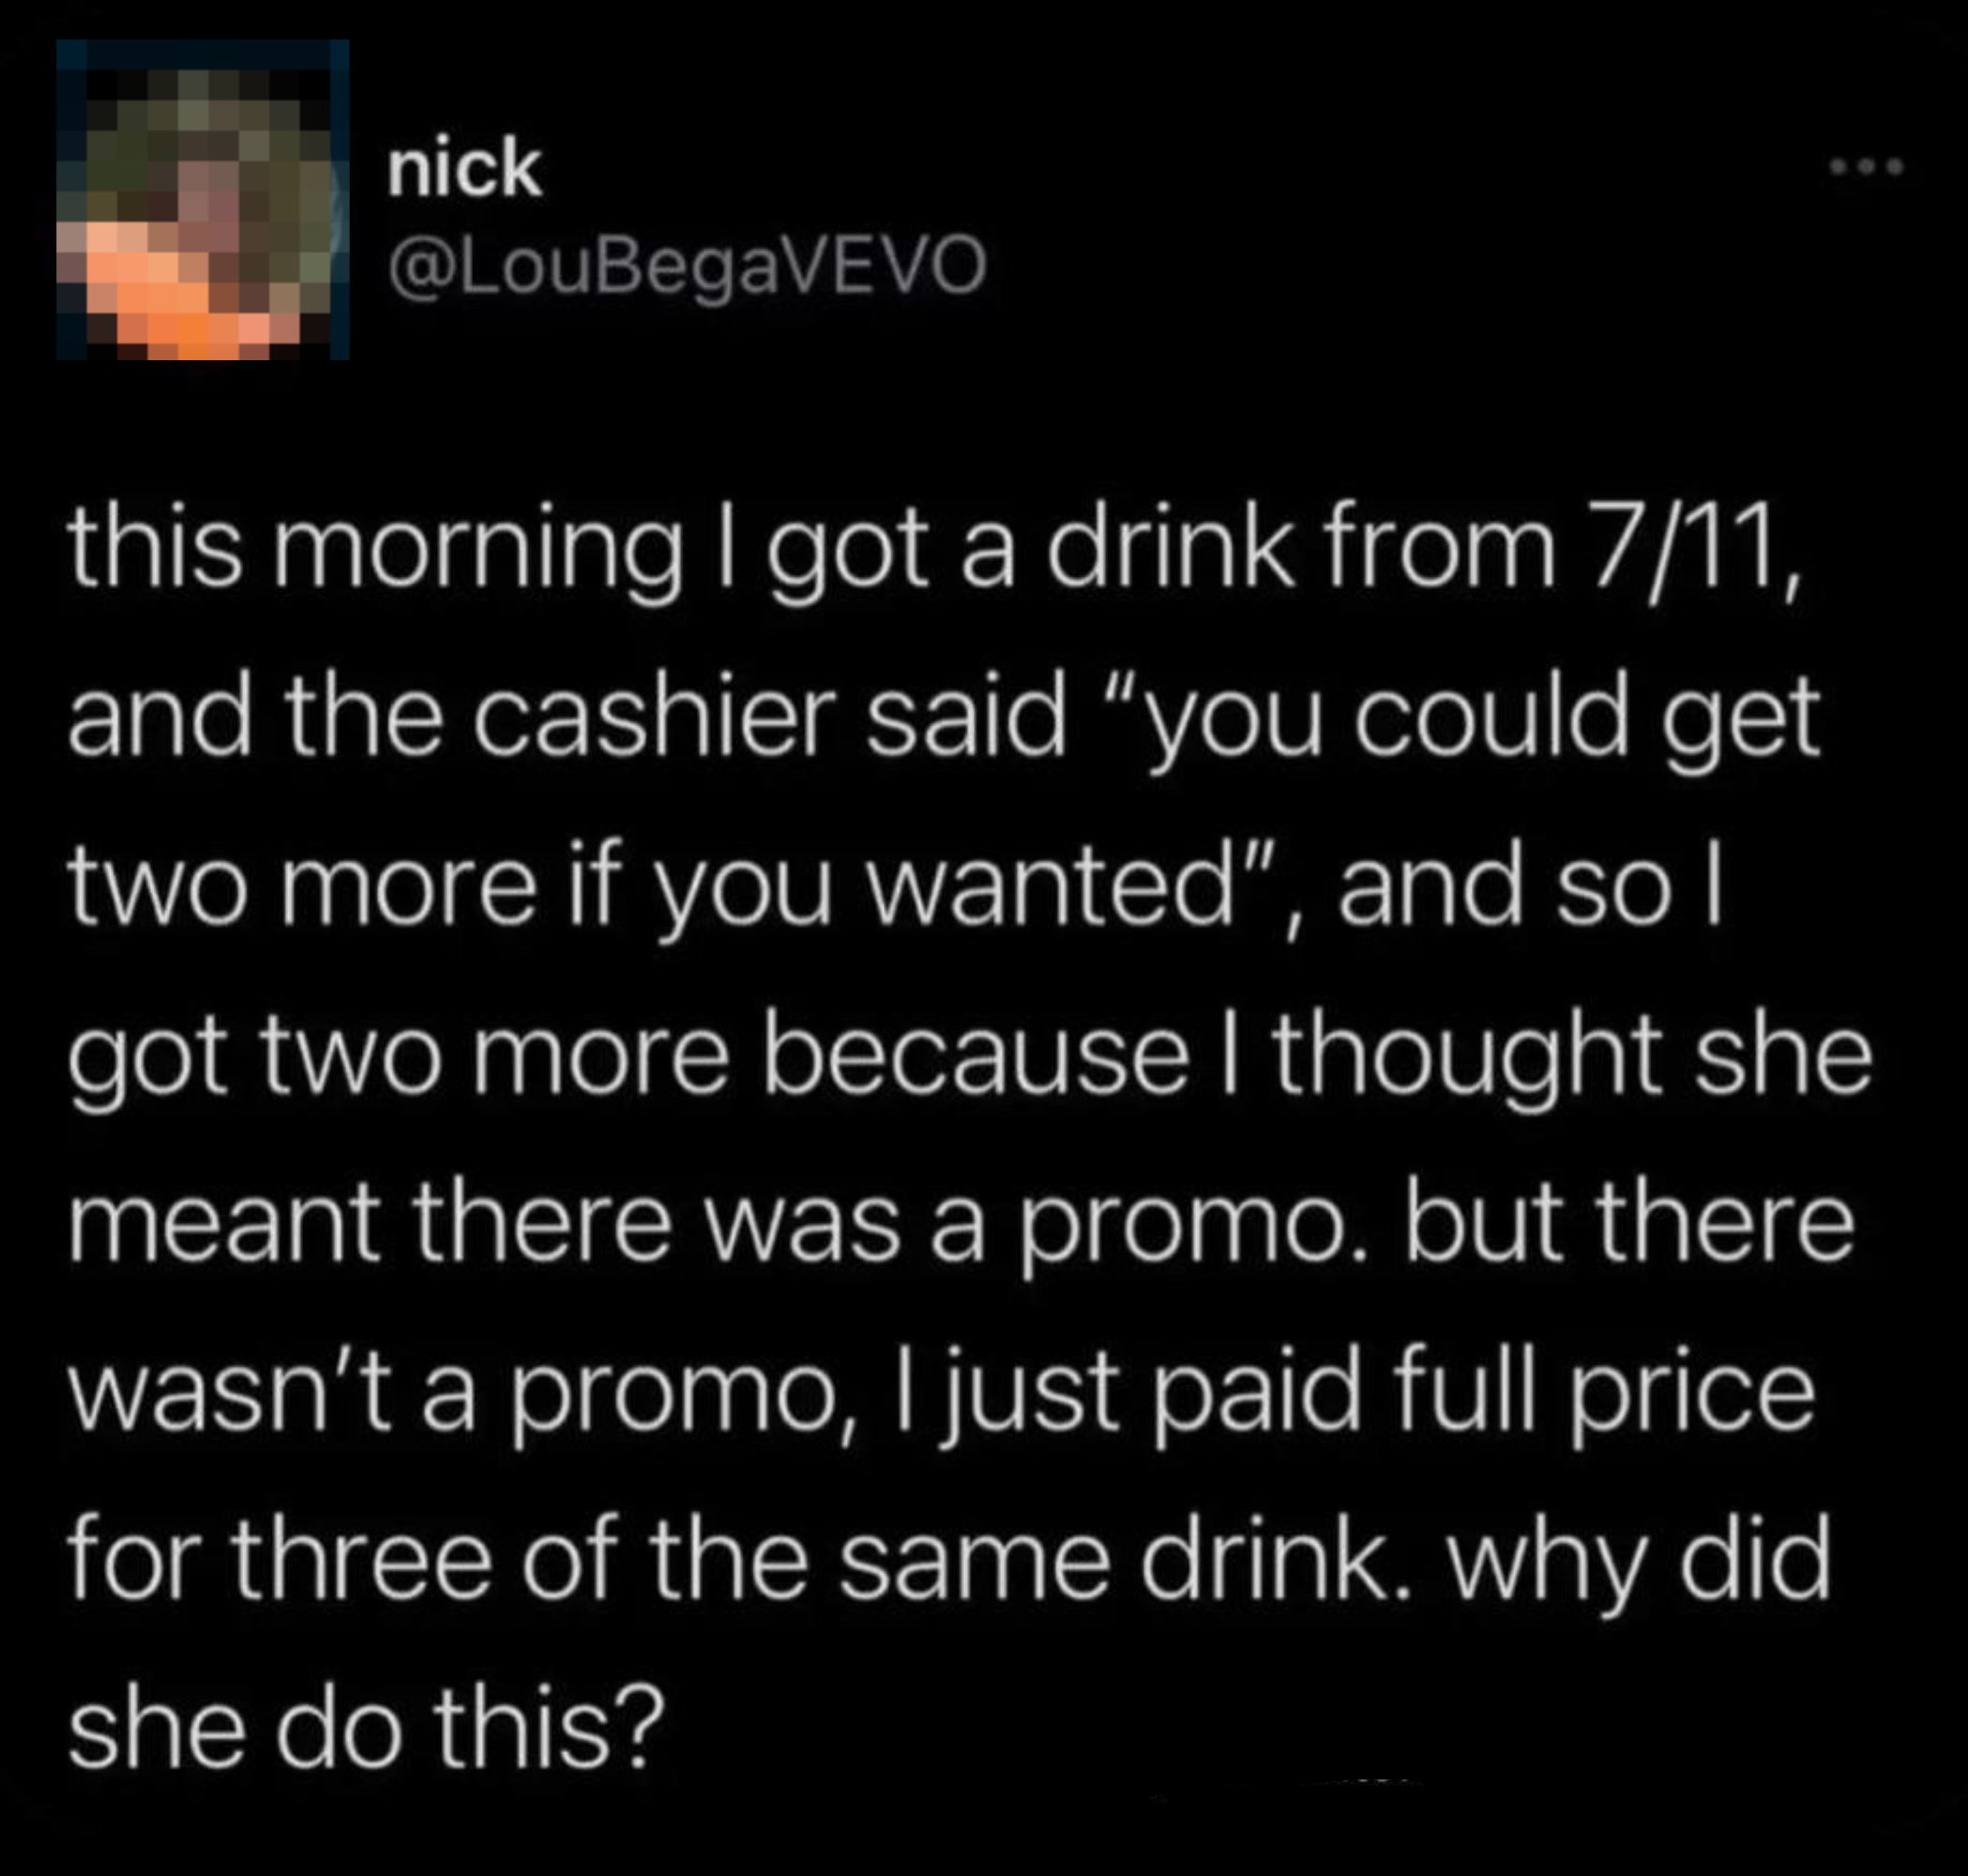 Tweet by LouBegaVEVO: A story about misunderstanding a cashier&#x27;s suggestion, resulting in paying full price for drinks without a promo